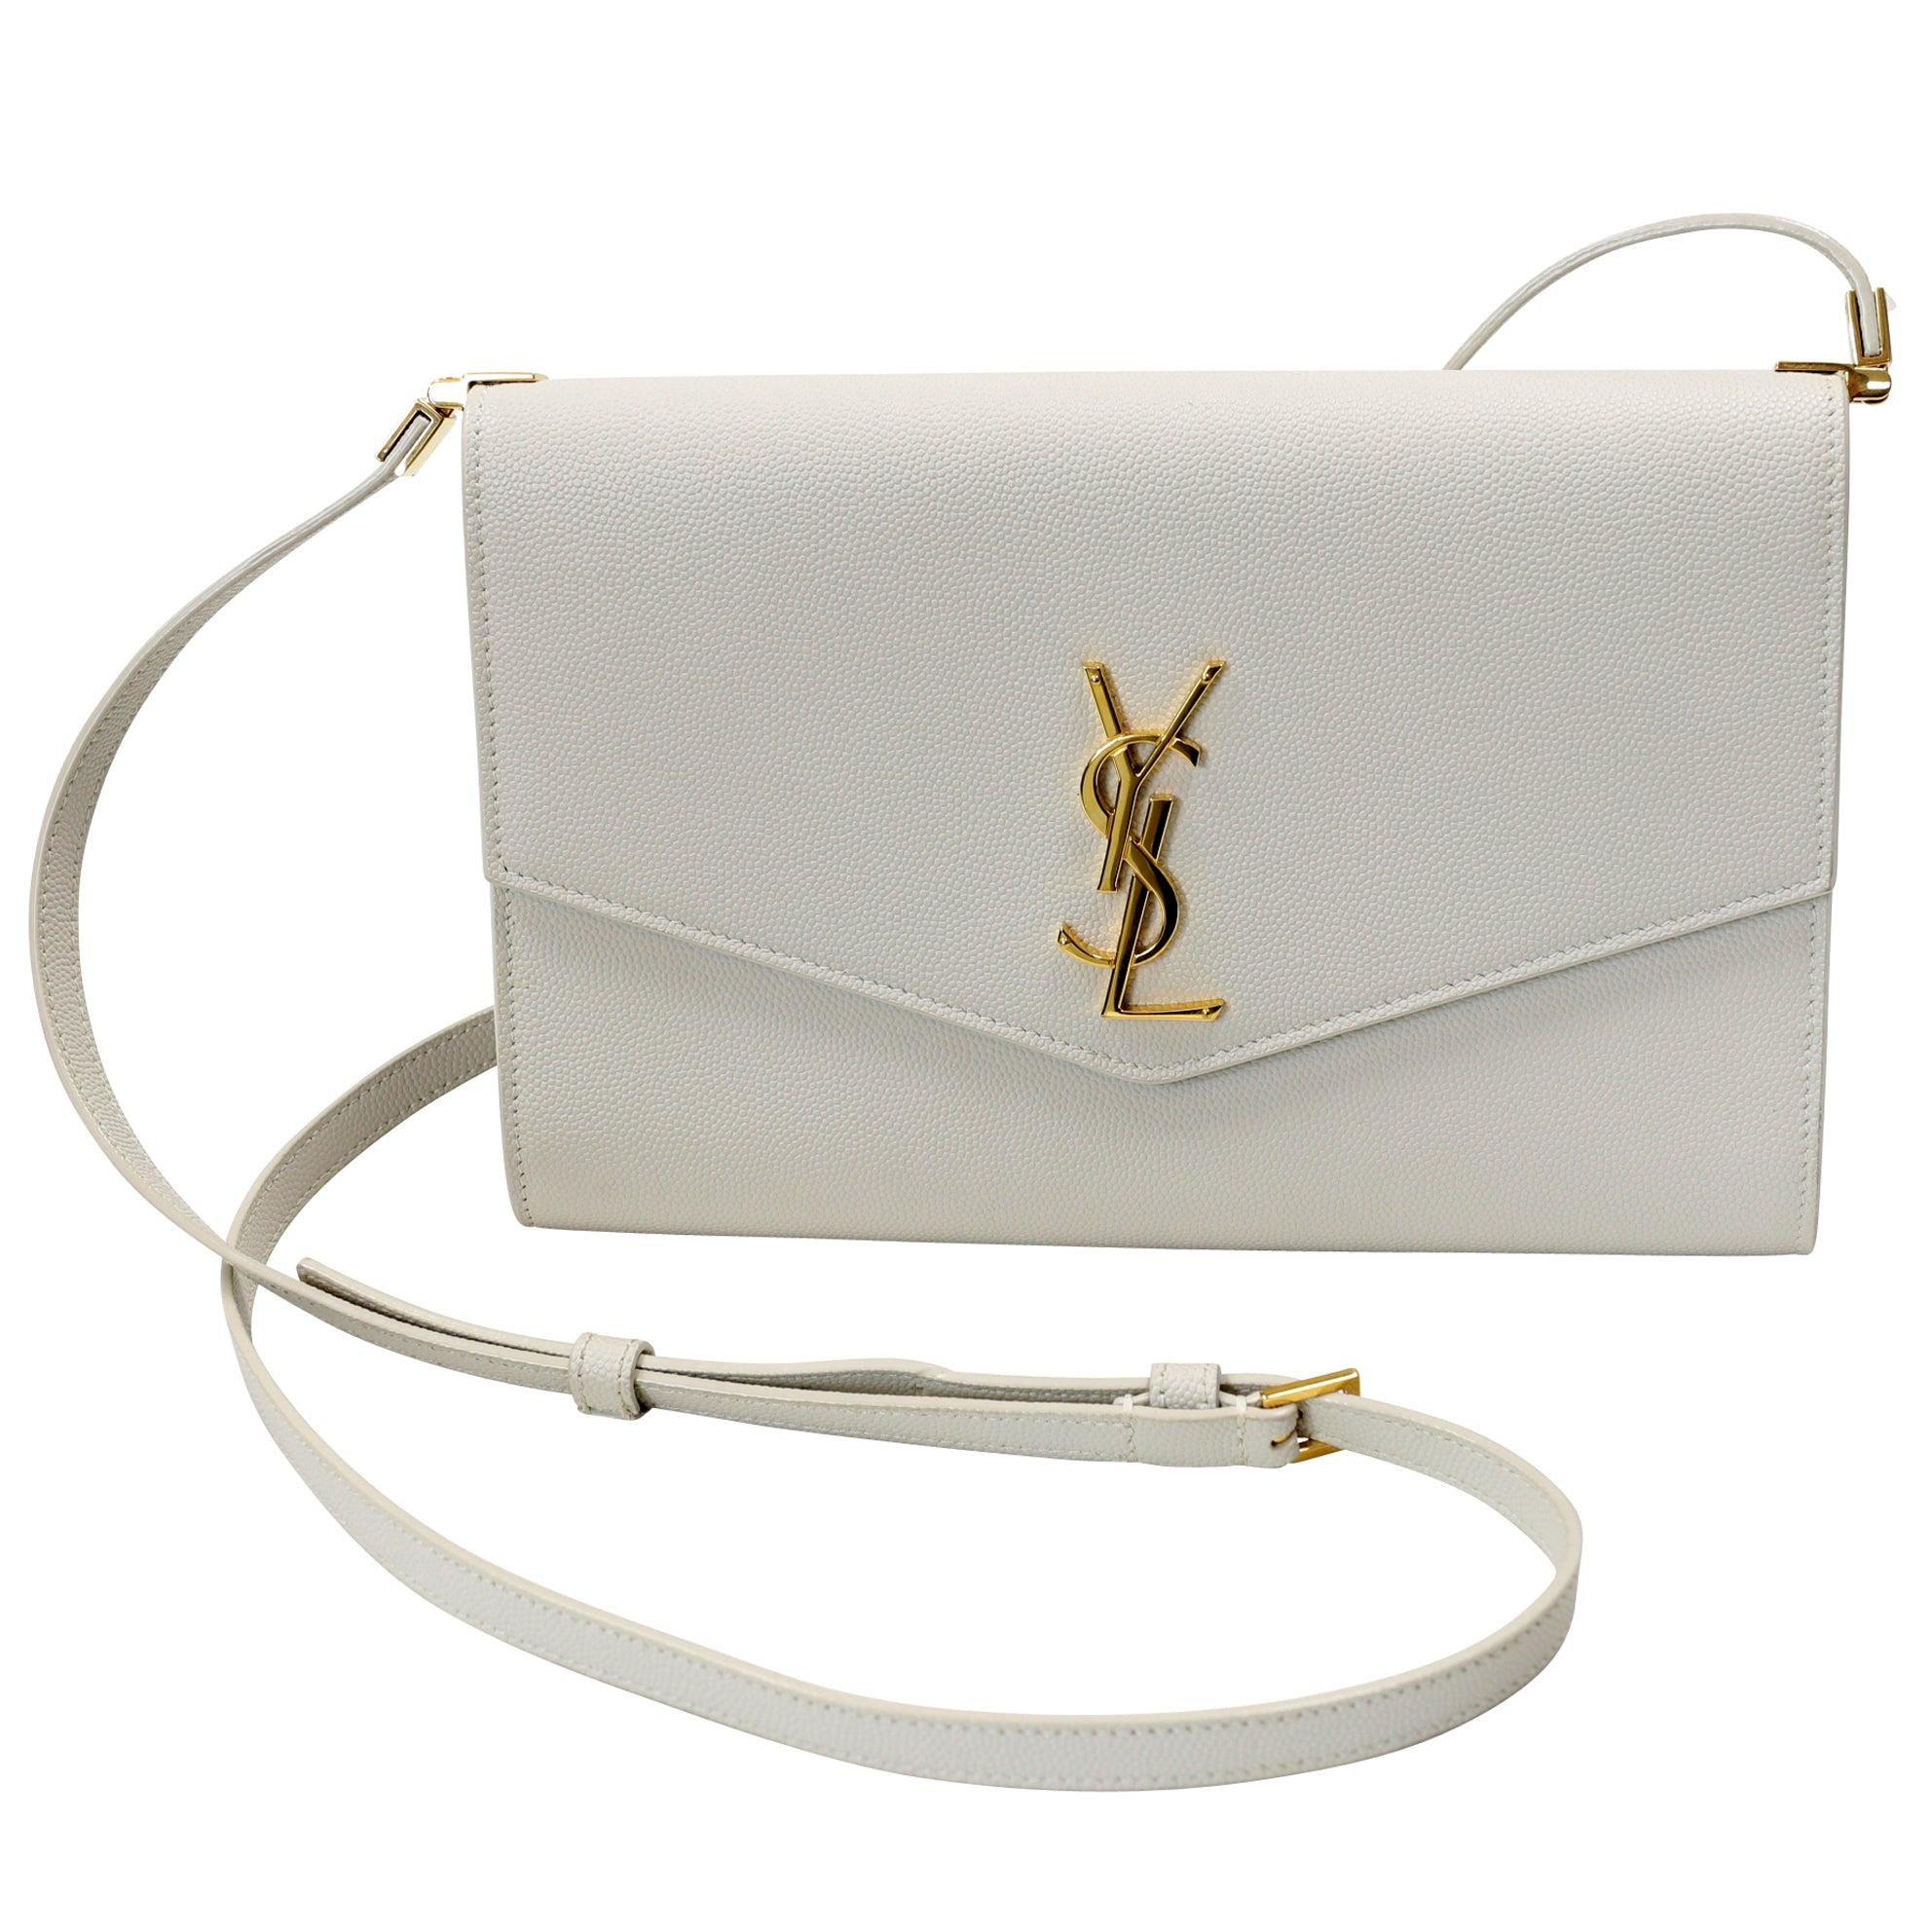 SAINT LAURENT's 'Envelope' bag is YSL traditional look made famous with signature YSL gold logo on the front. Made in Italy from grained-leather, it has a long leather shoulder strap, so you can alter the drop and is topped with a tonal logo plaque.